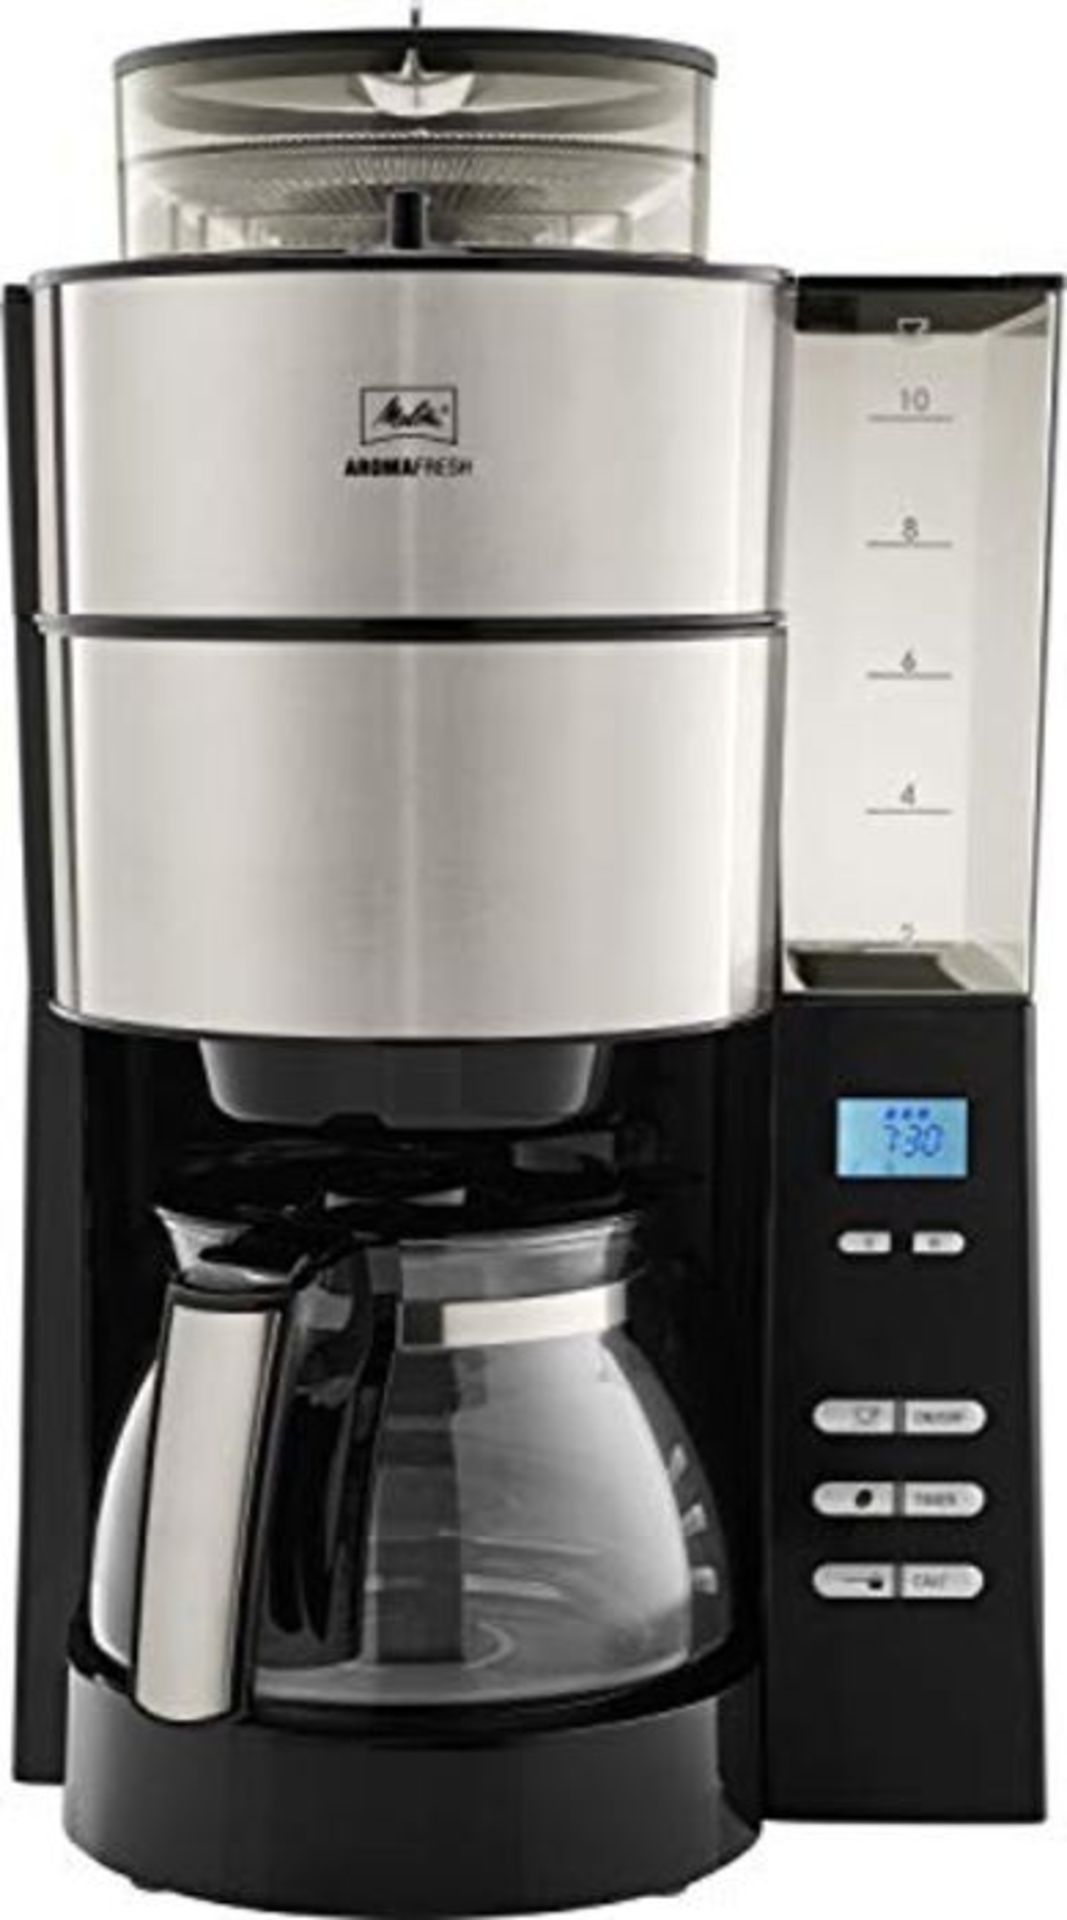 RRP £119.00 [INCOMPLETE] Melitta AromaFresh Grind and Brew, 1021-01, Filter Coffee Machine, Glass